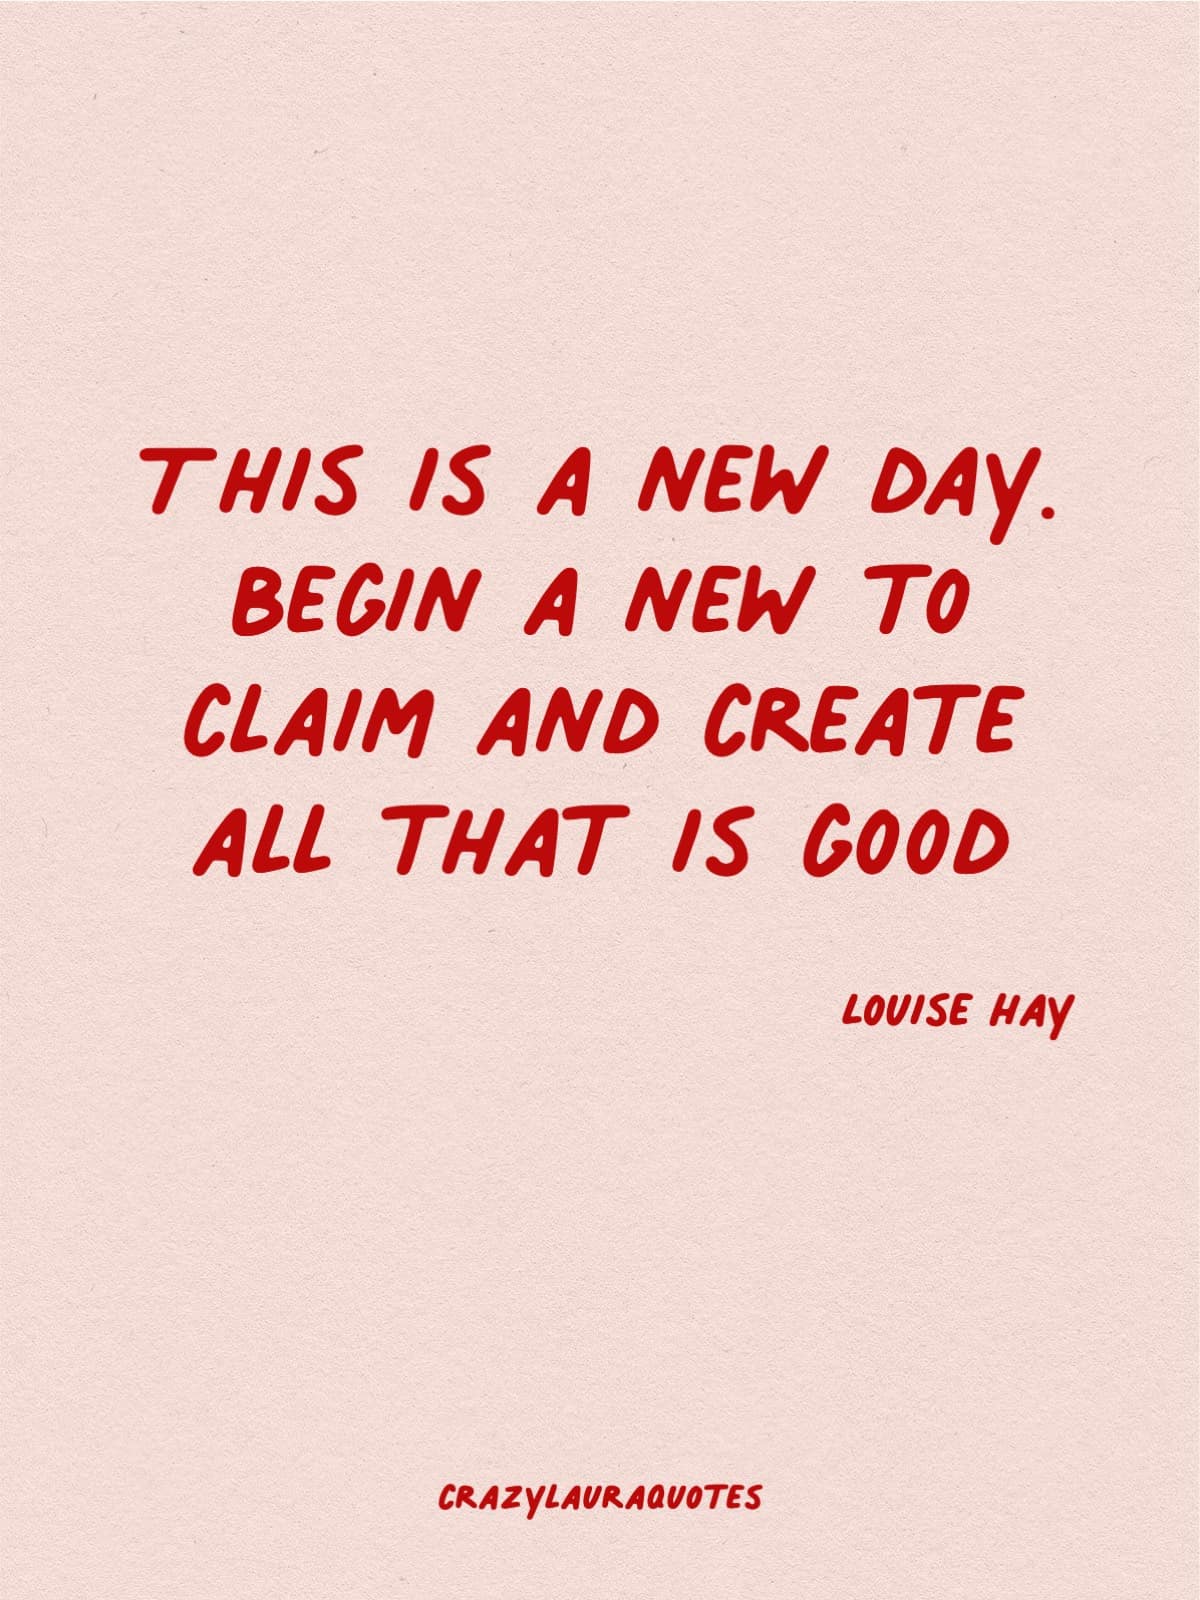 claim and create good of a new day quote